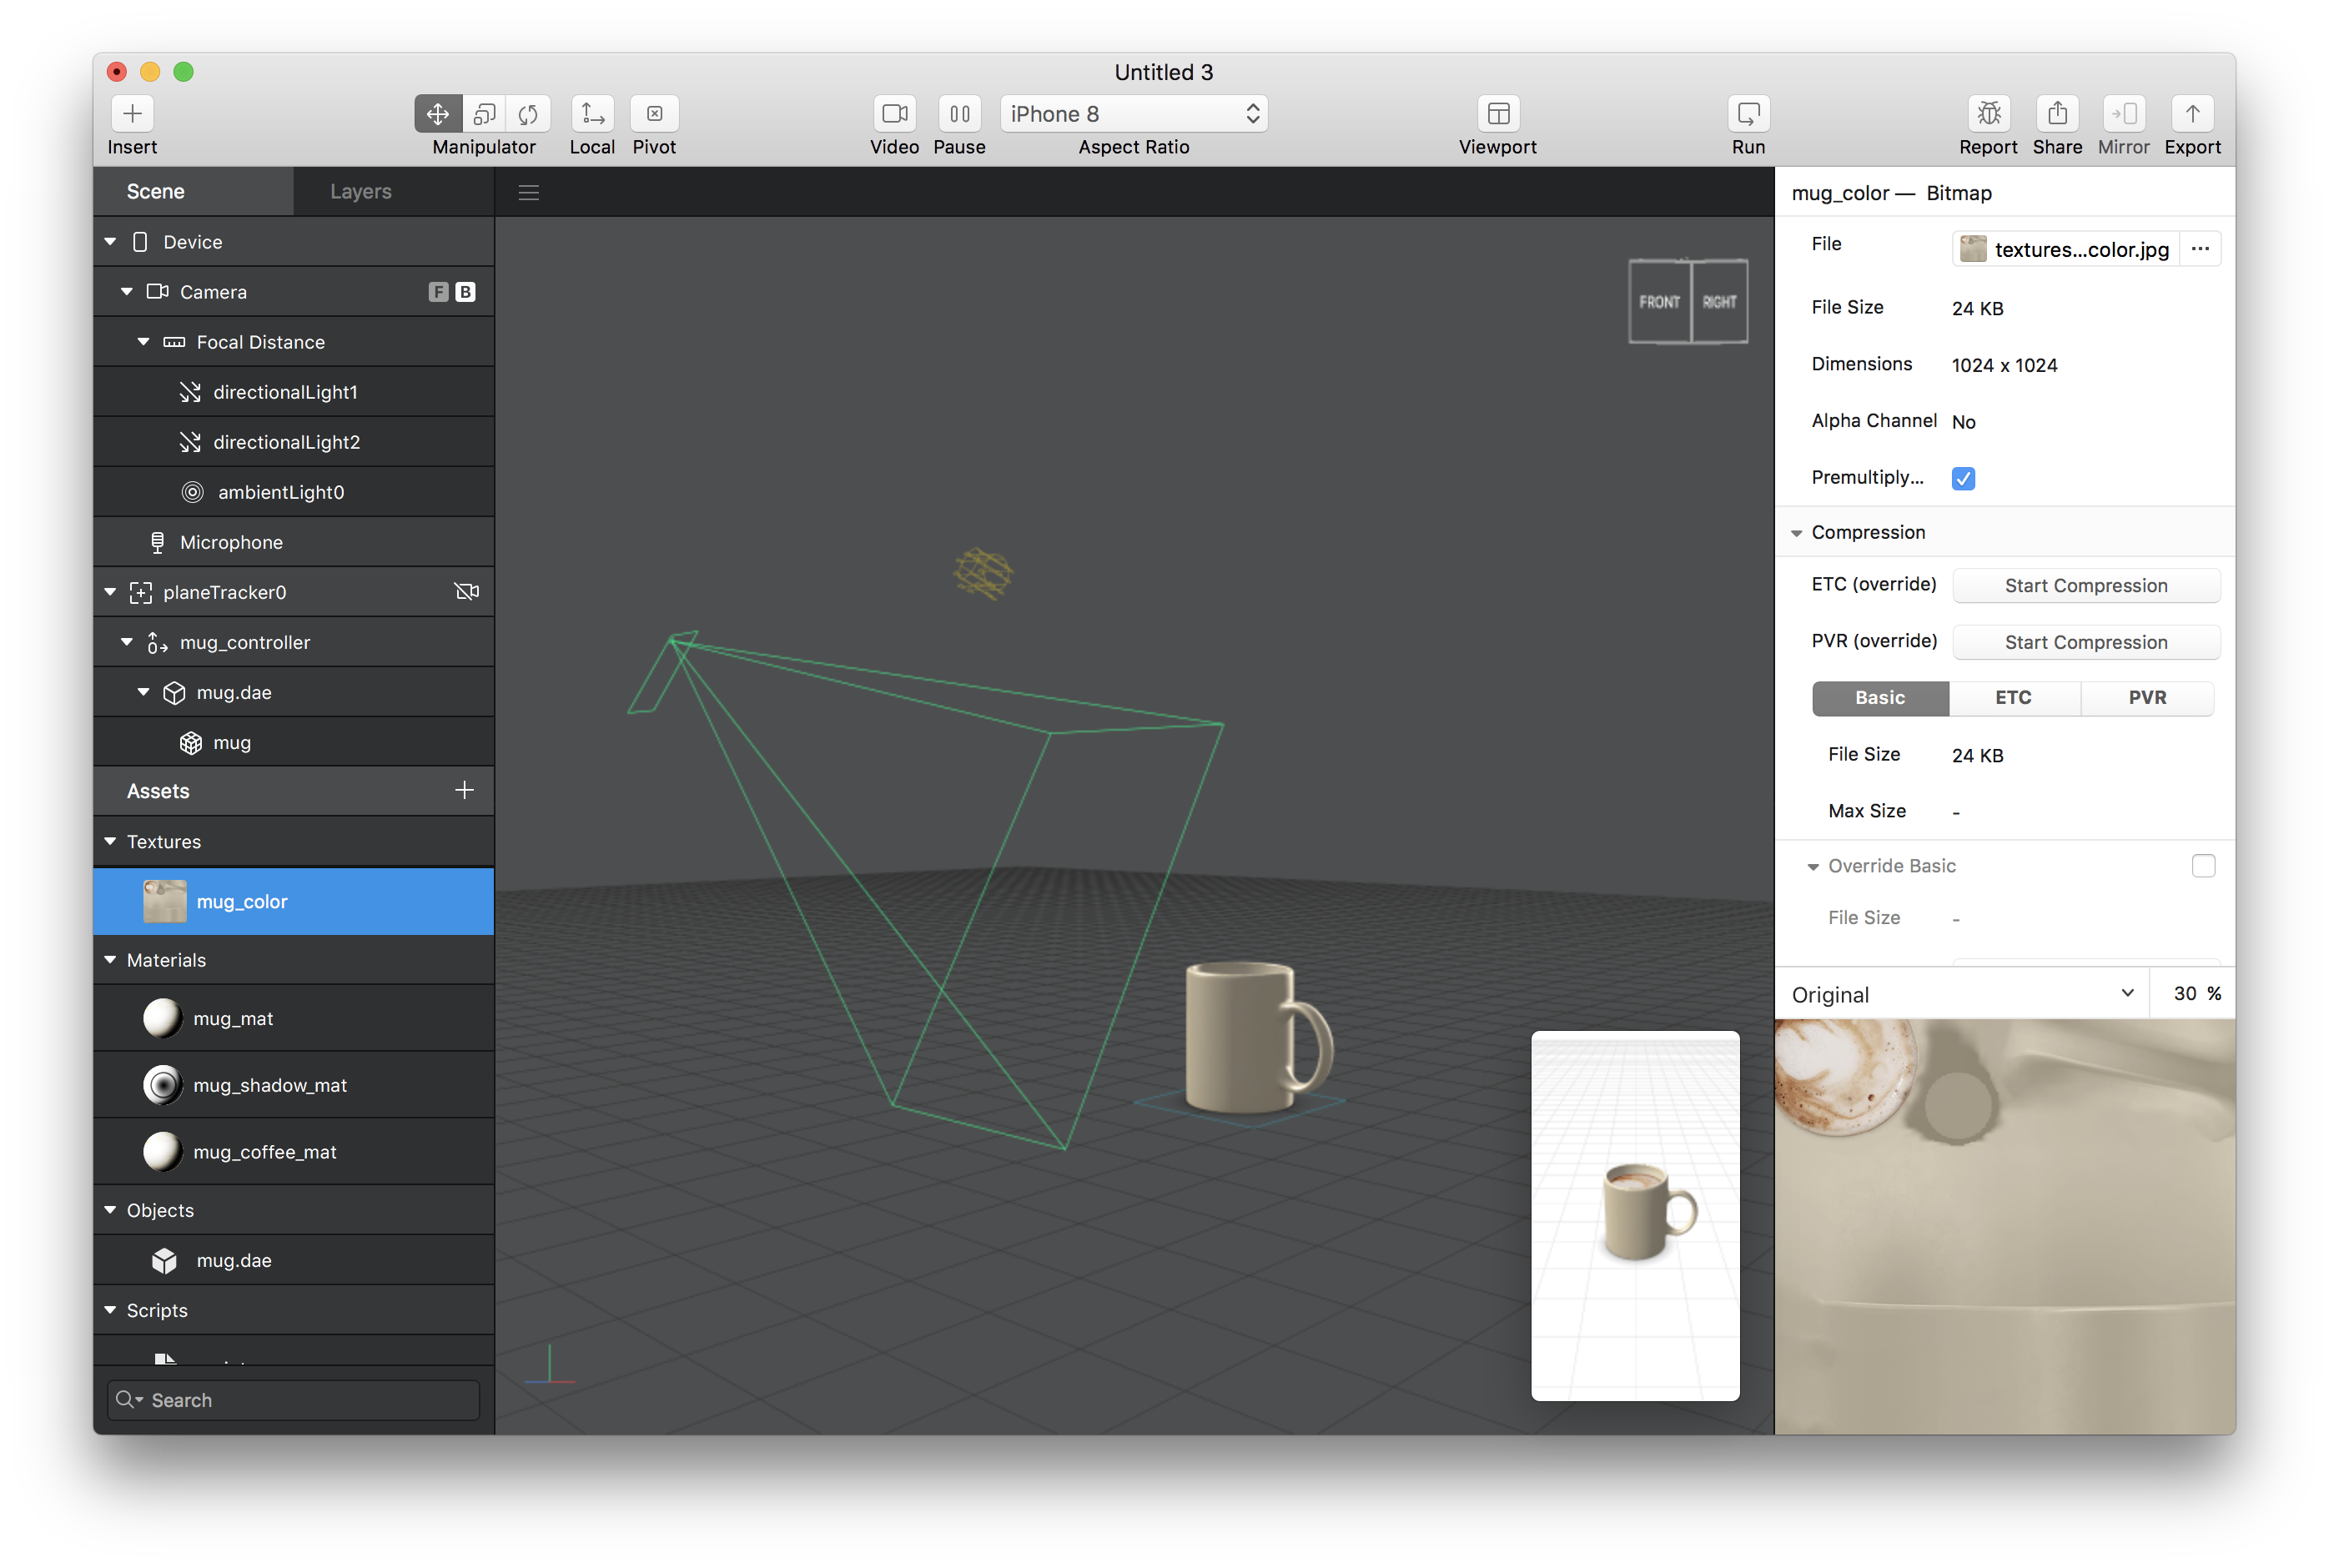  AR Studio running on macOS 10.12 Sierra. In the screenshot, you can see an example of a Plane Tracker with a mug.
